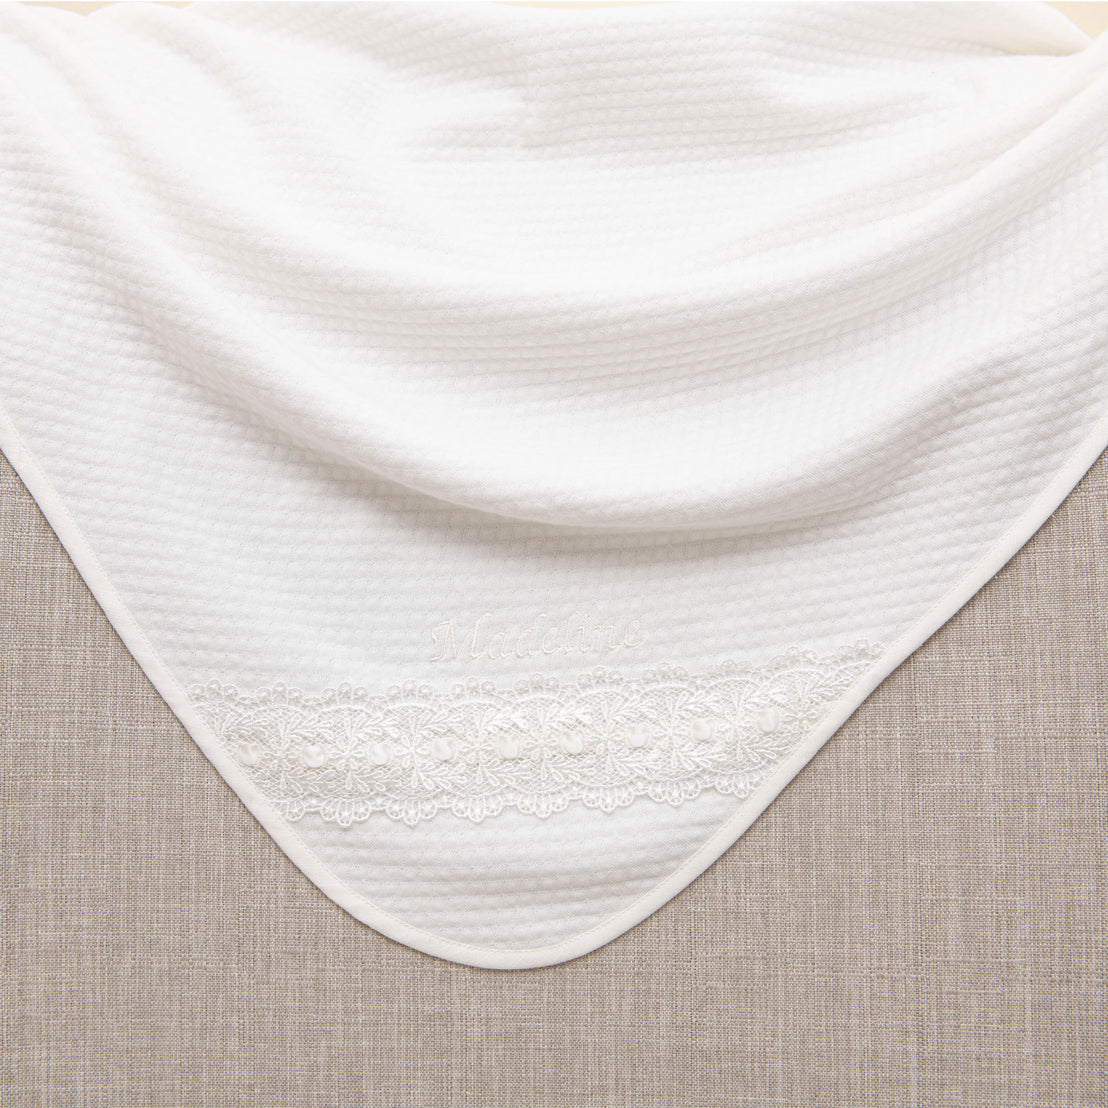 Madeline Blanket with delicate lace detailing along the edge, placed on a beige fabric background.